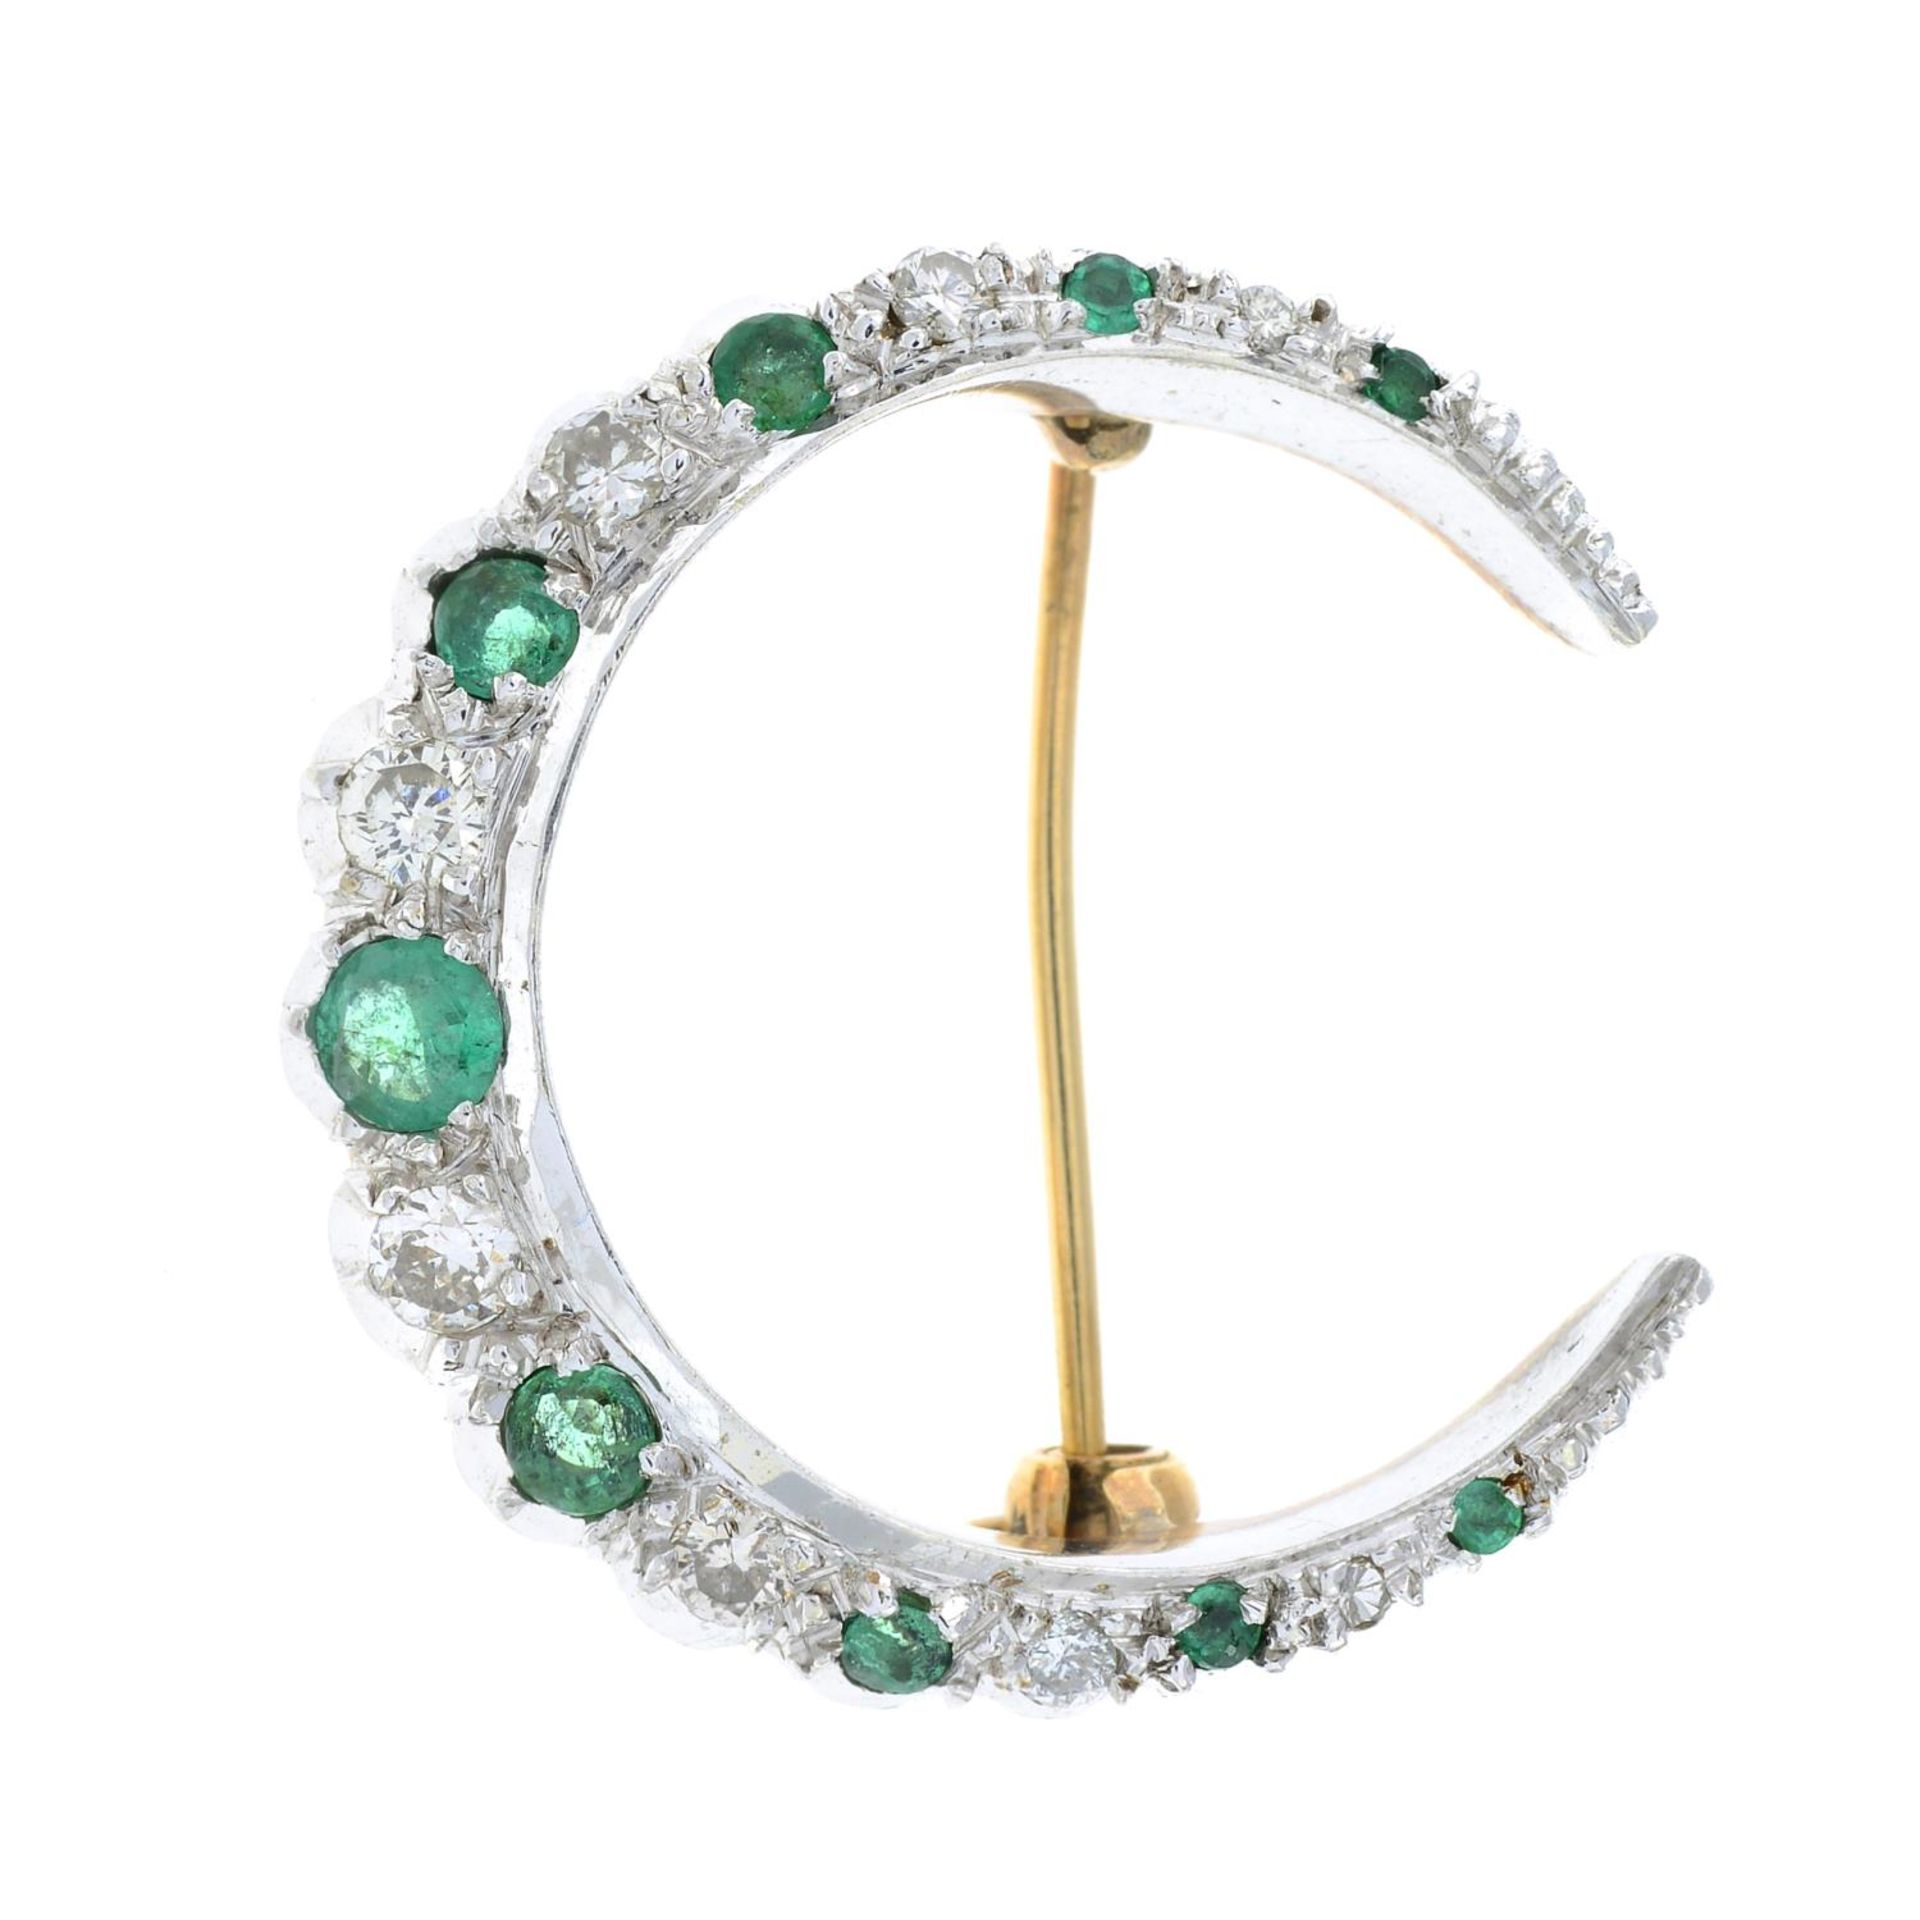 A 9ct gold emerald and brilliant-cut diamond crescent moon brooch.Estimated total diamond weight